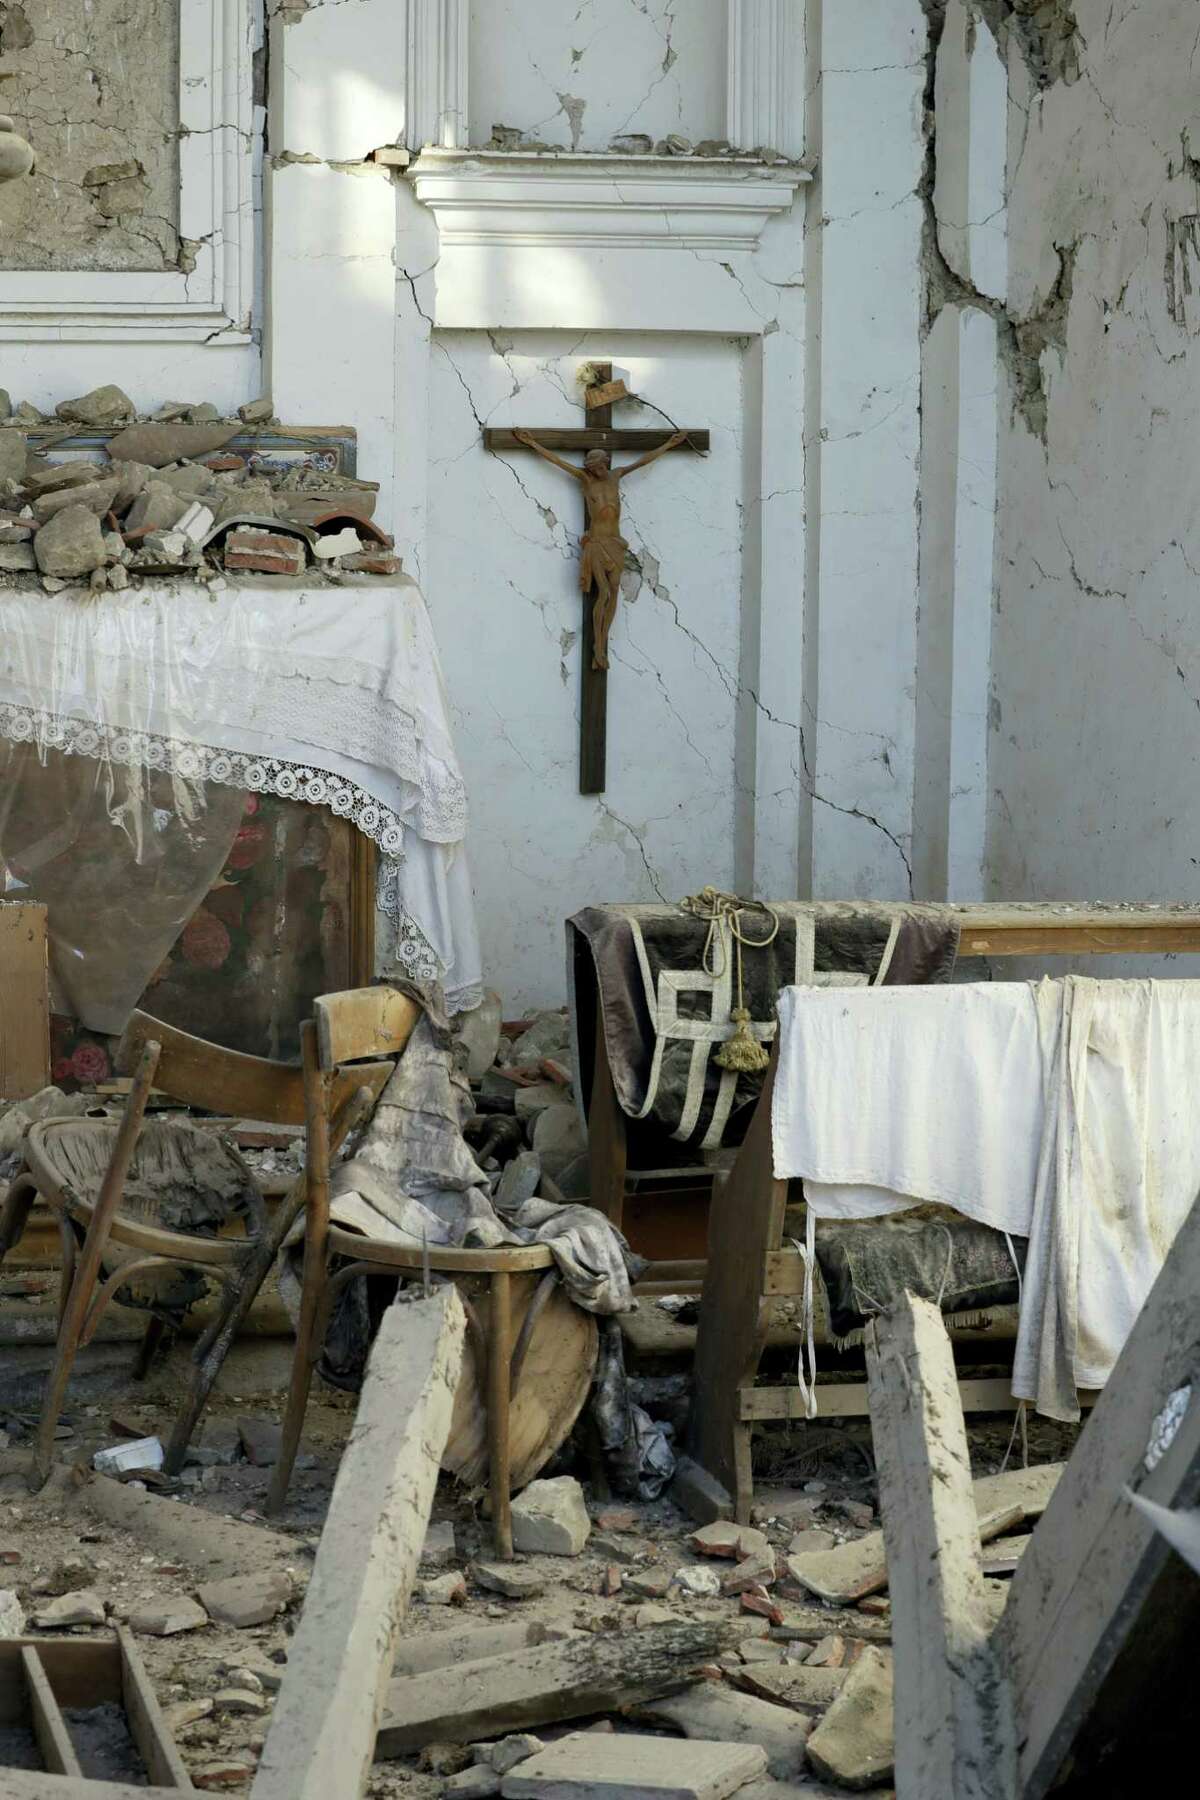 A crucifix hangs on the wall of the severely damaged church in the village of Santi Lorenzo e Flaviano, central Italy, Saturday, Aug. 27, 2016. Italians bid farewell Saturday to victims of the devastating earthquake that struck a mountainous region of central Italy this week.